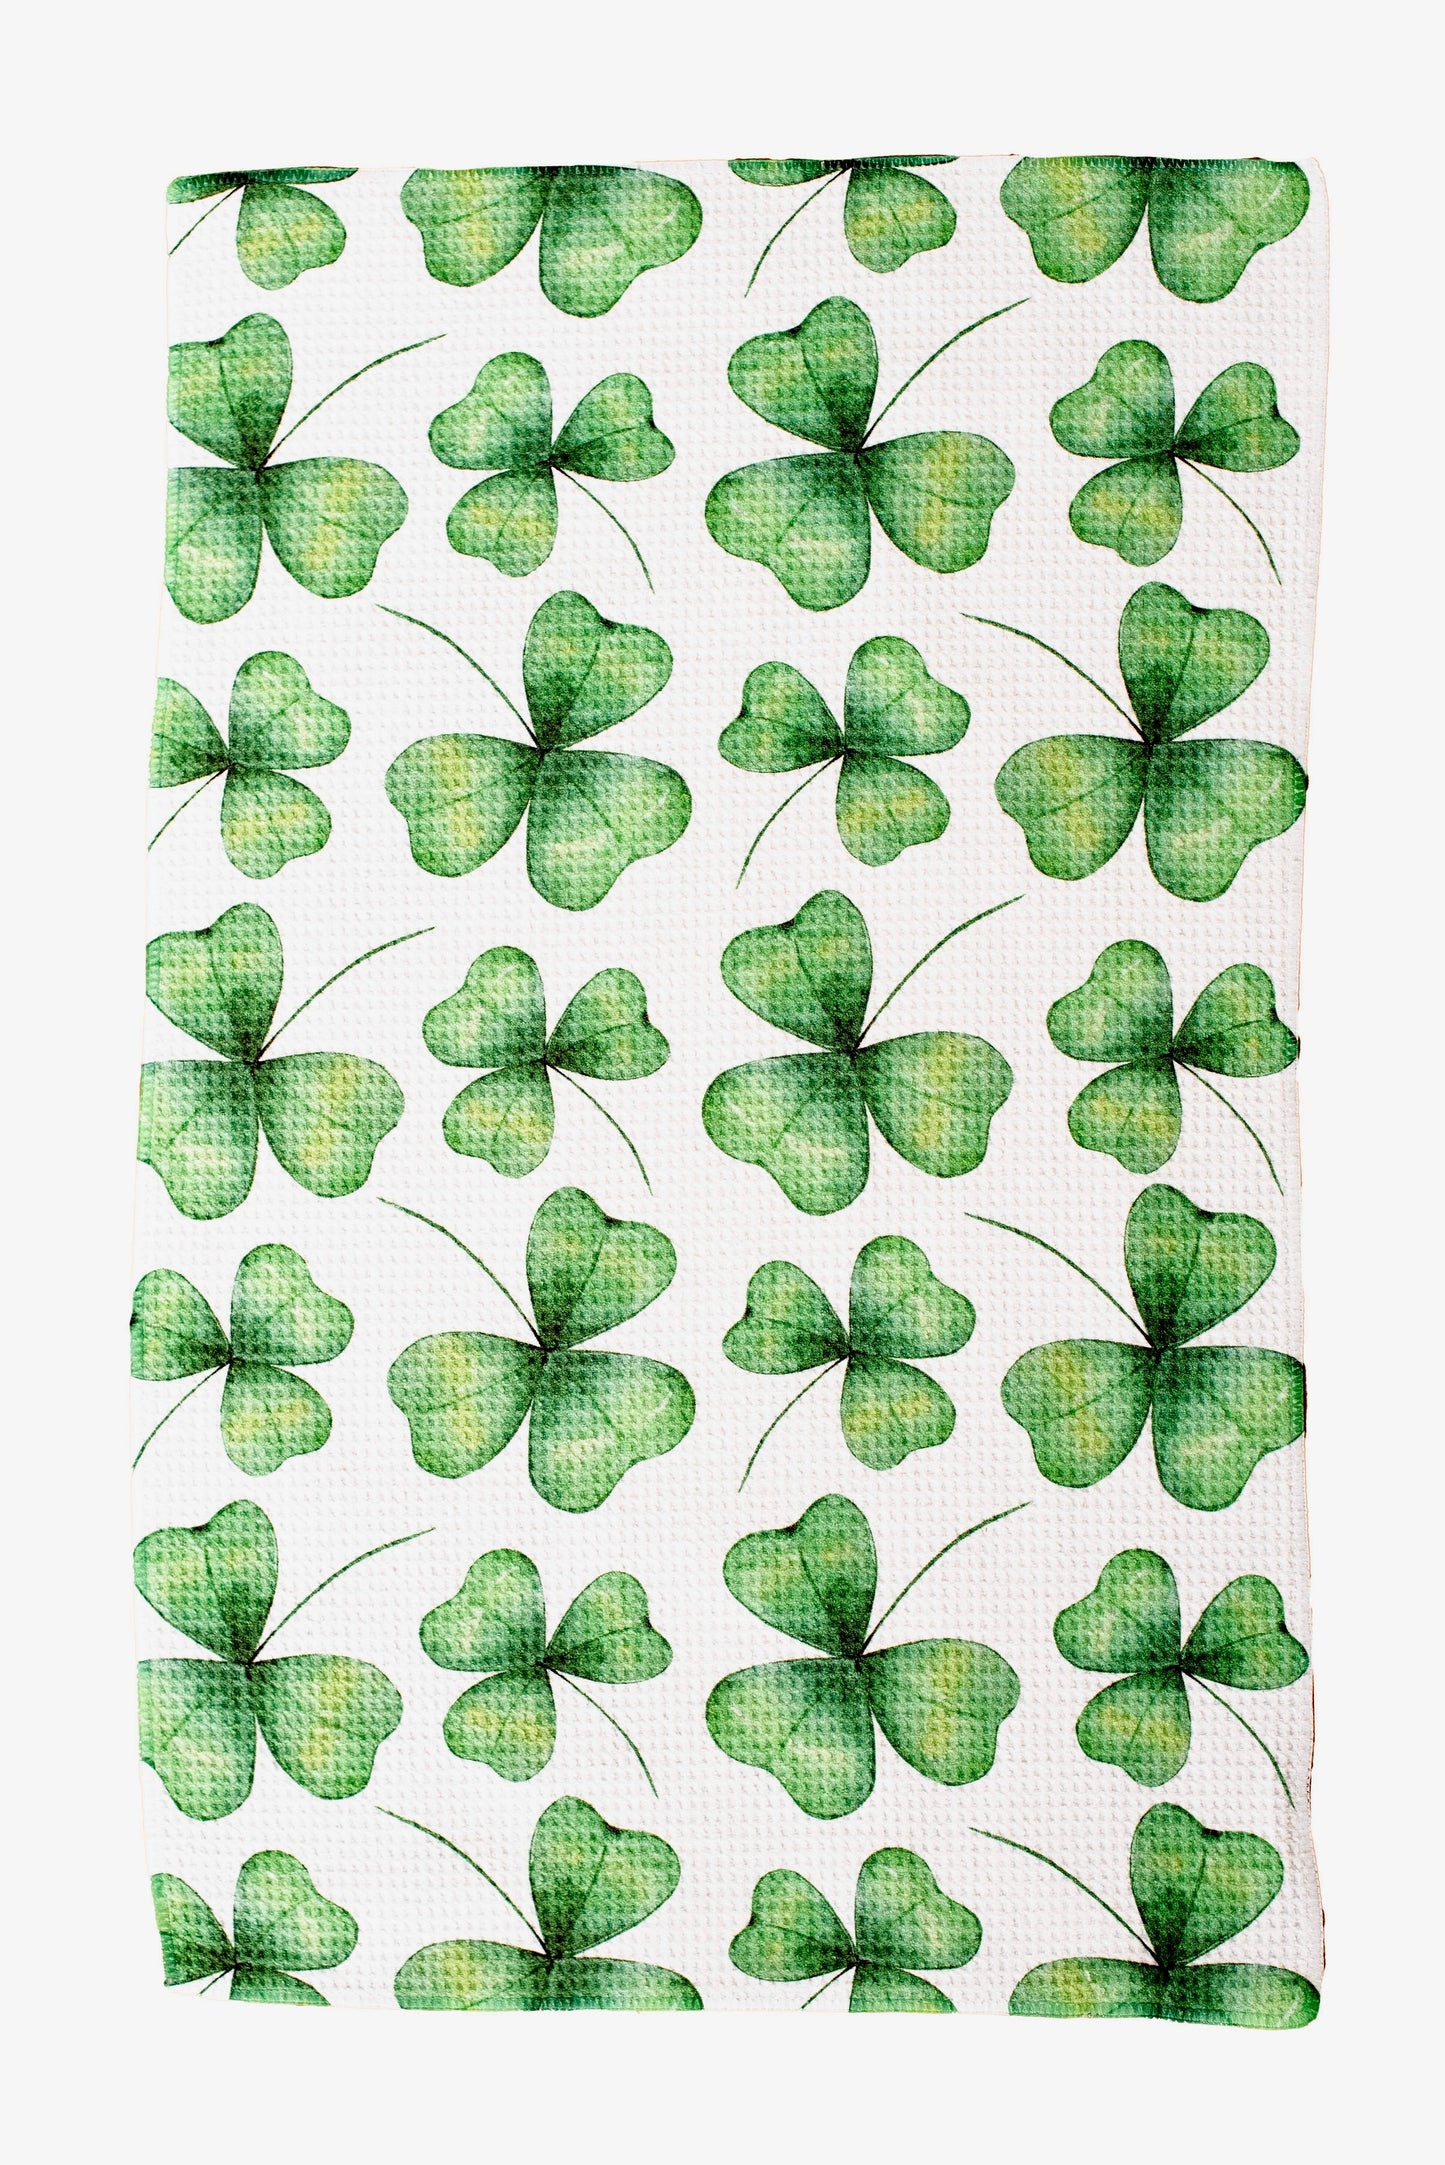 Clover Over and Over: Single-Sided Hand Towel